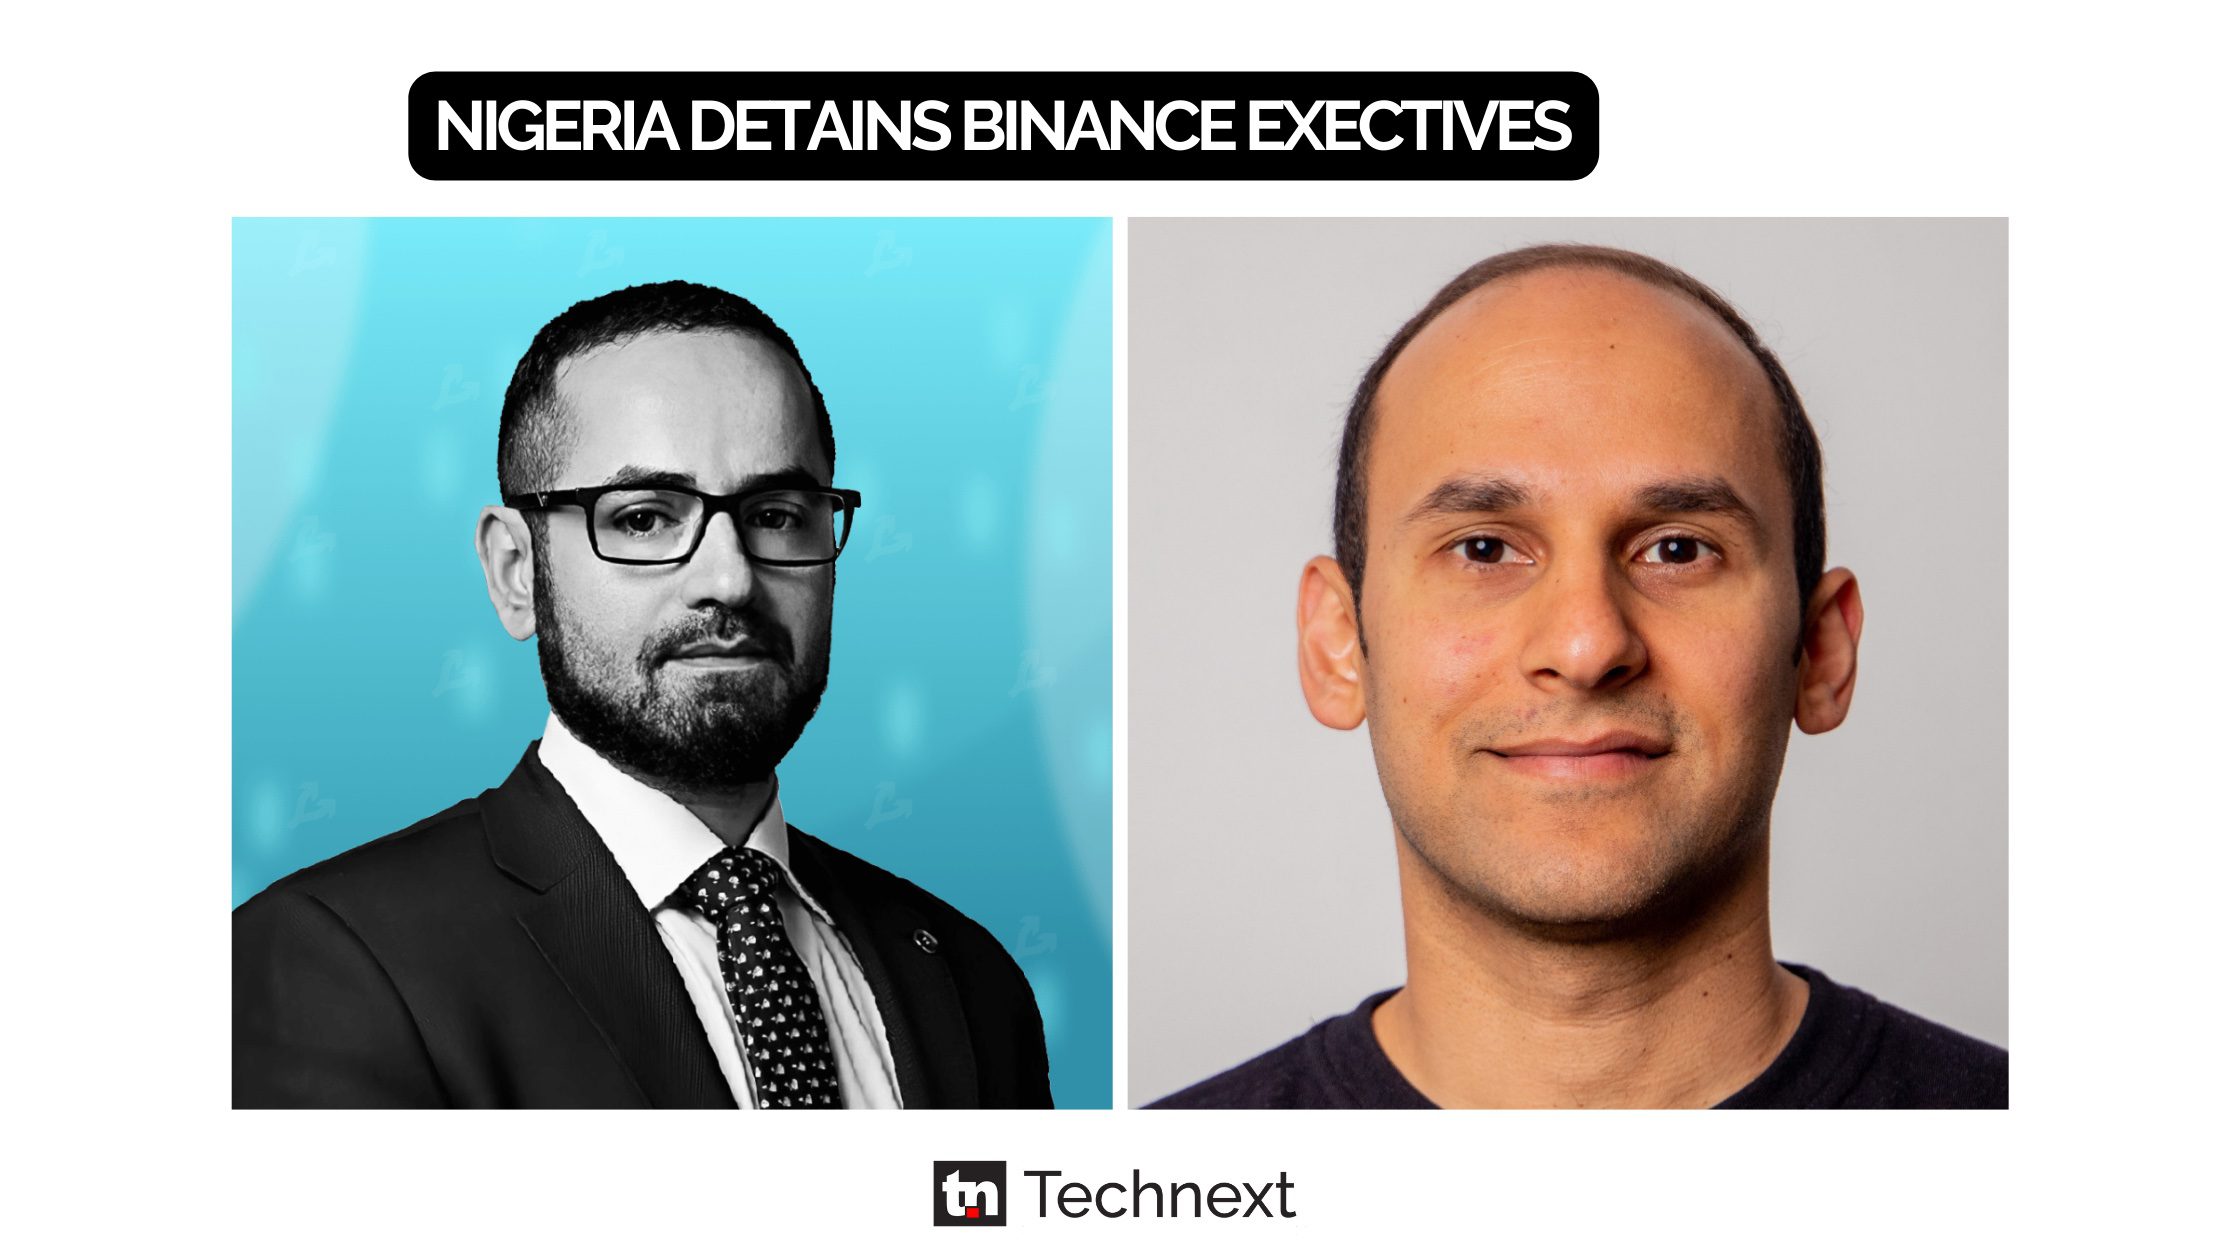 A US Federal agent and a Kenyan executive: Families reveal the identity of detained Binance executives in Nigeria